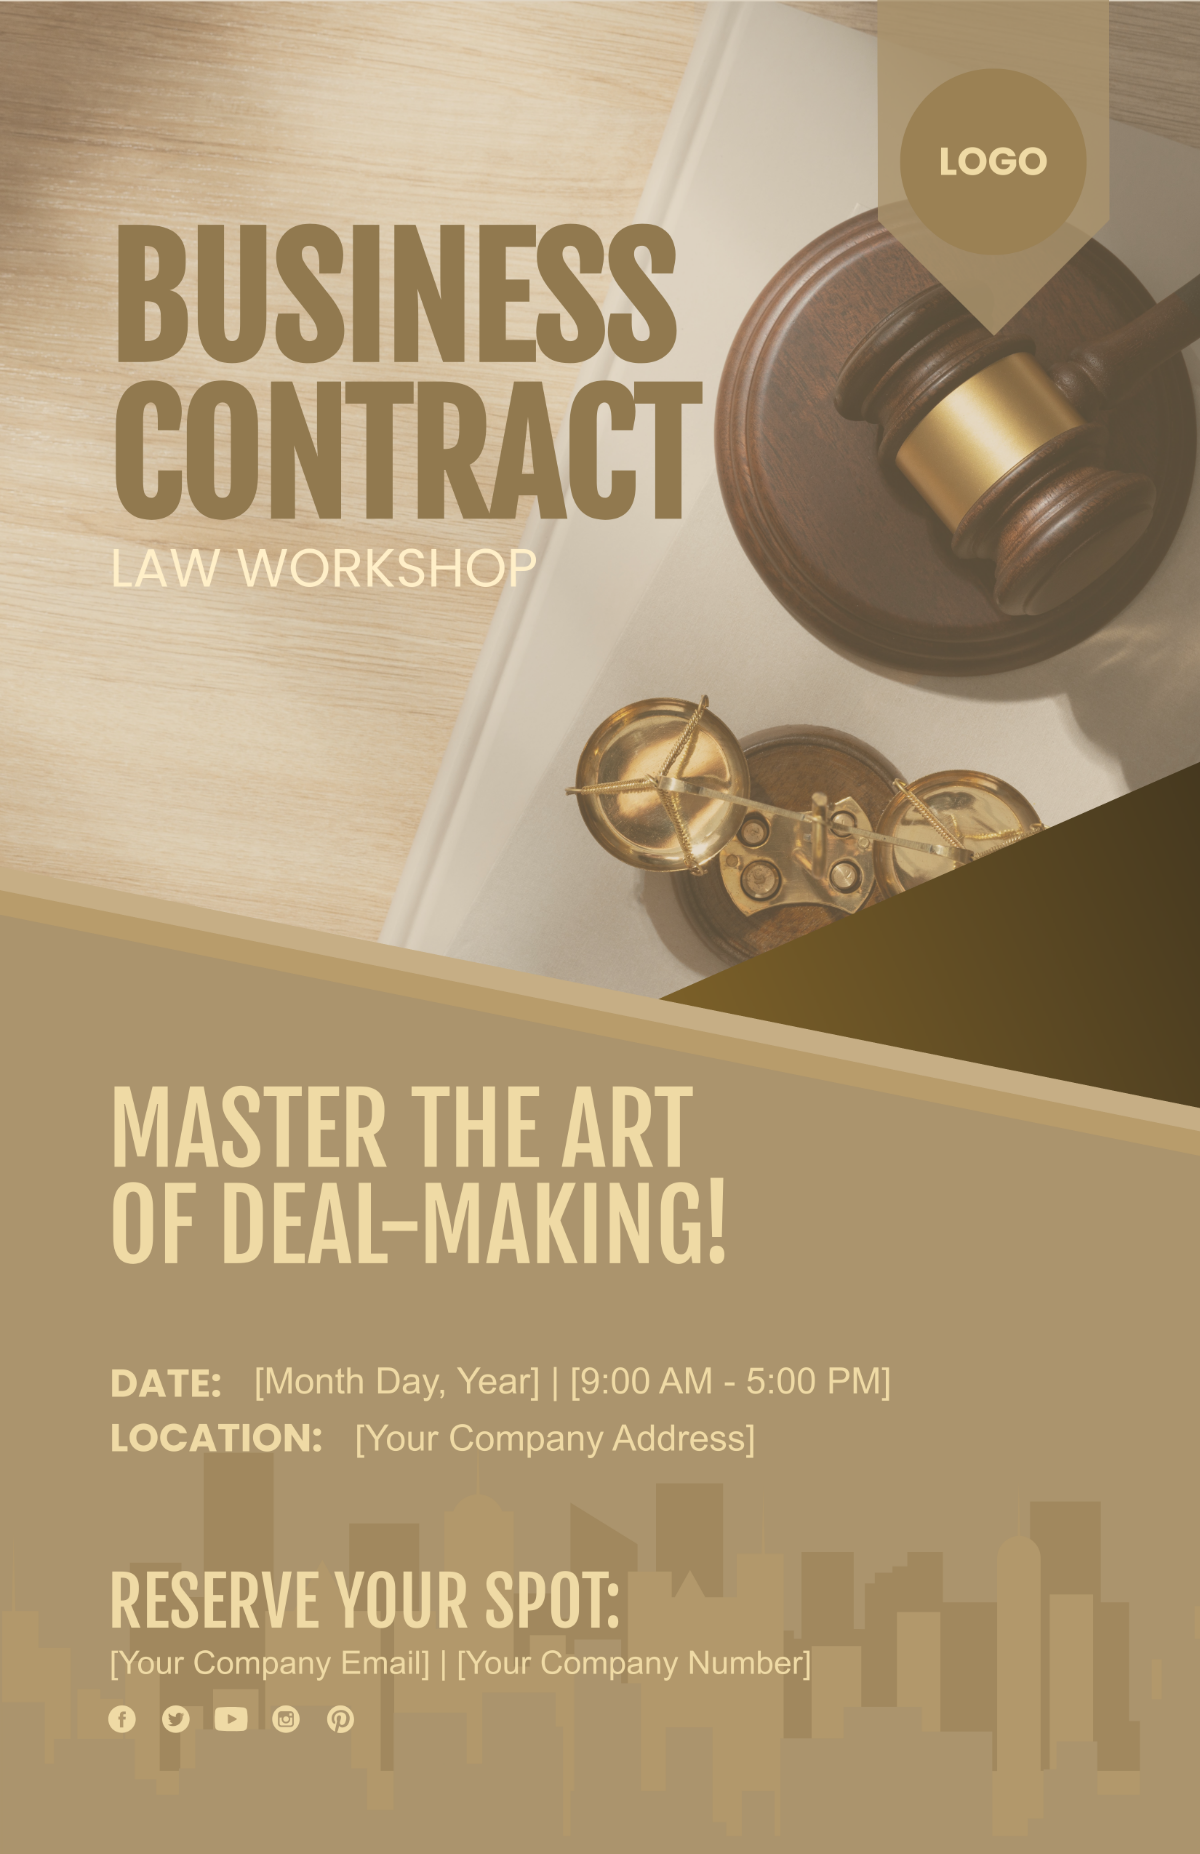 Business Contract Law Workshop Poster Template